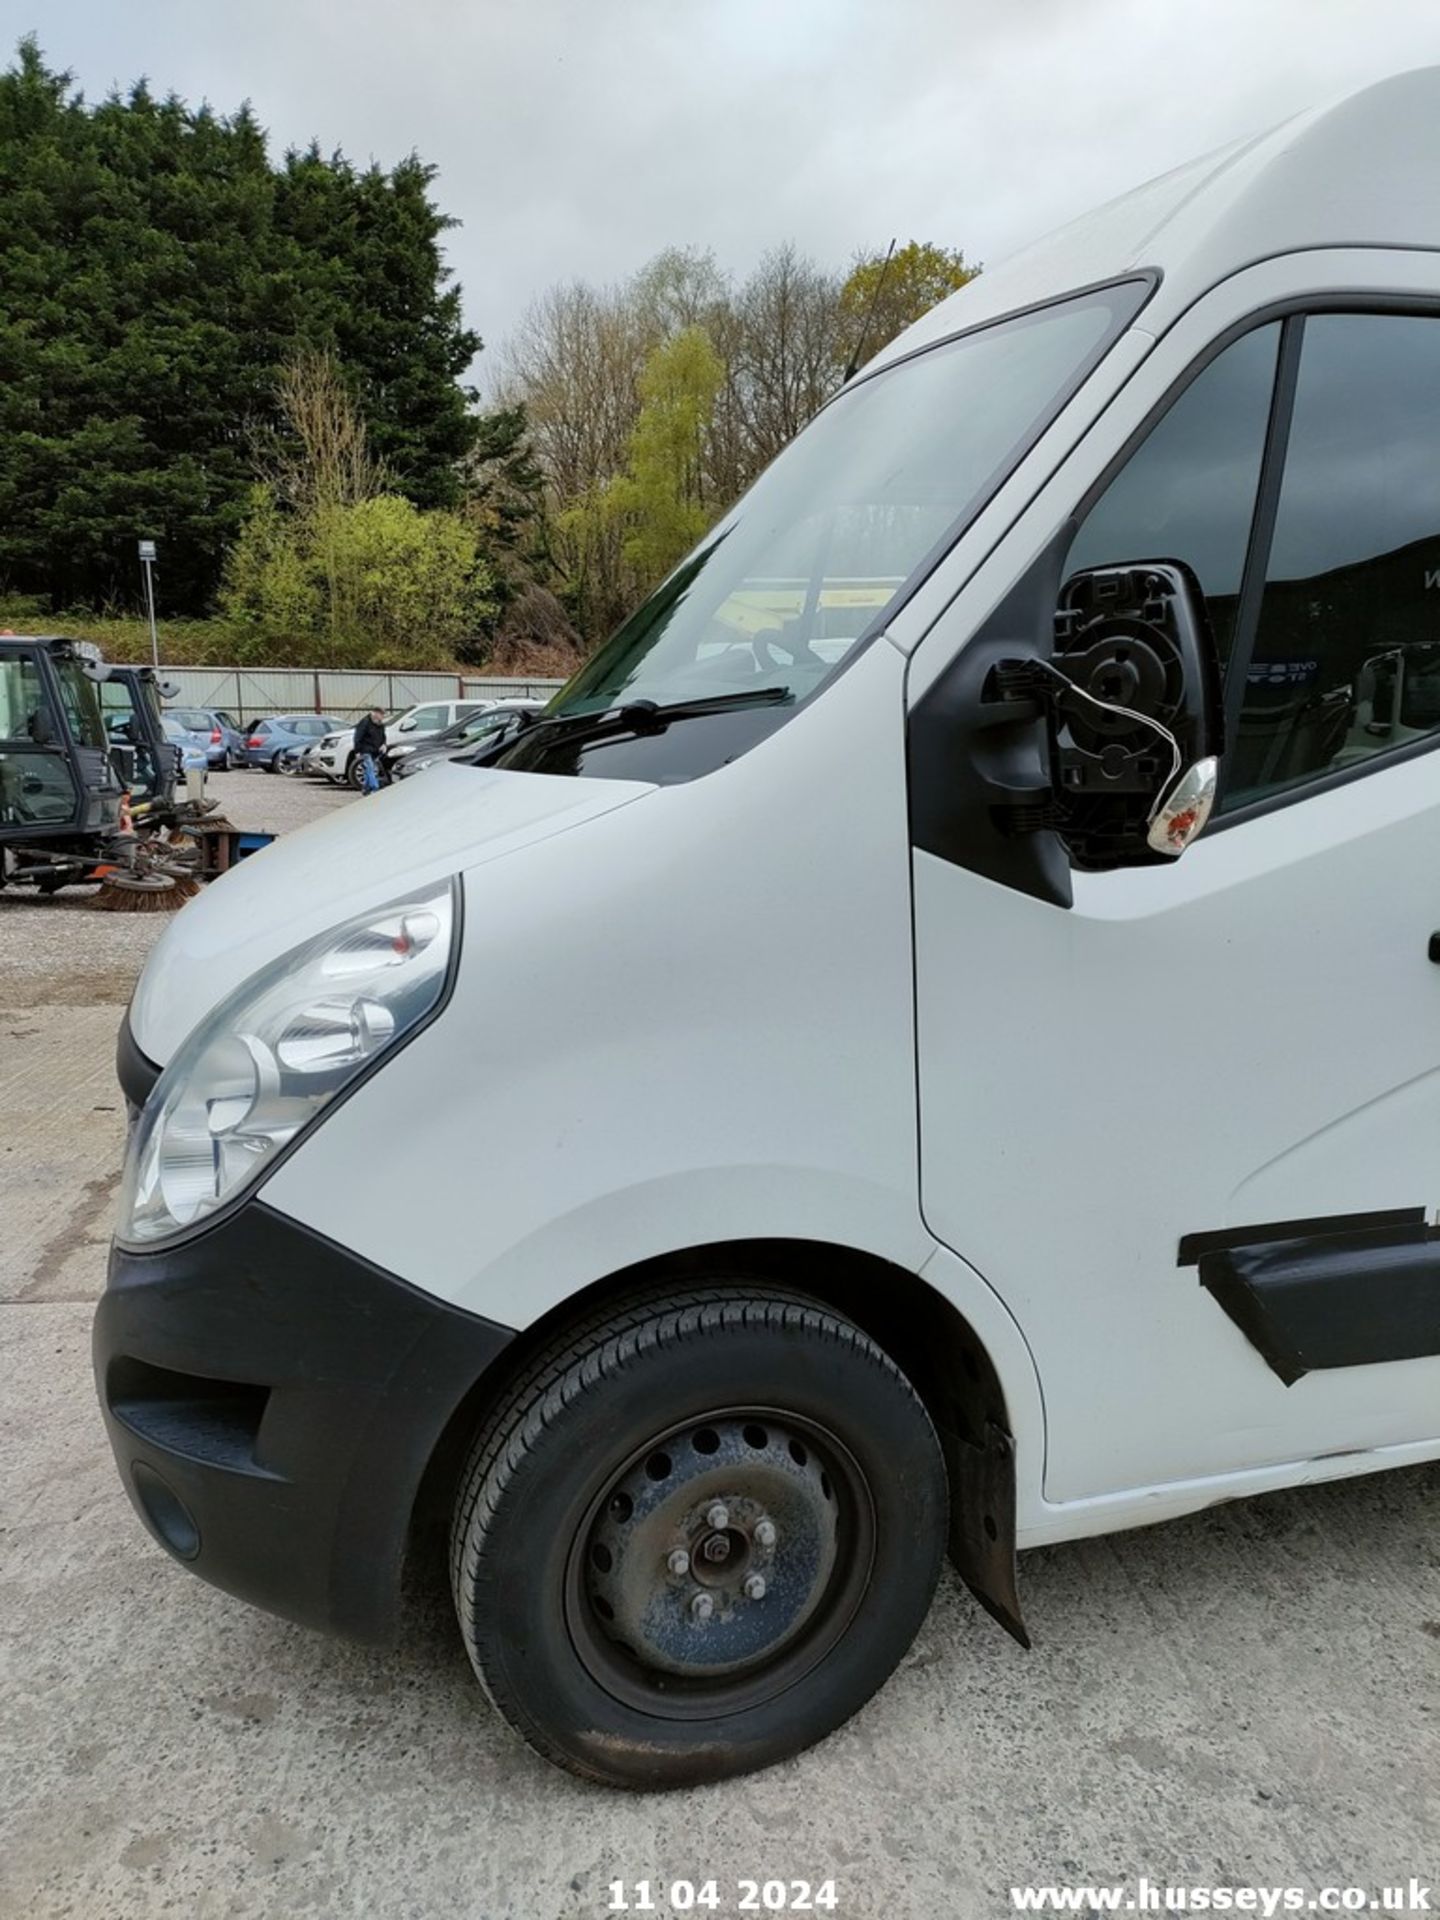 18/68 RENAULT MASTER LM35 BUSINESS DCI - 2298cc 5dr Van (White) - Image 25 of 68